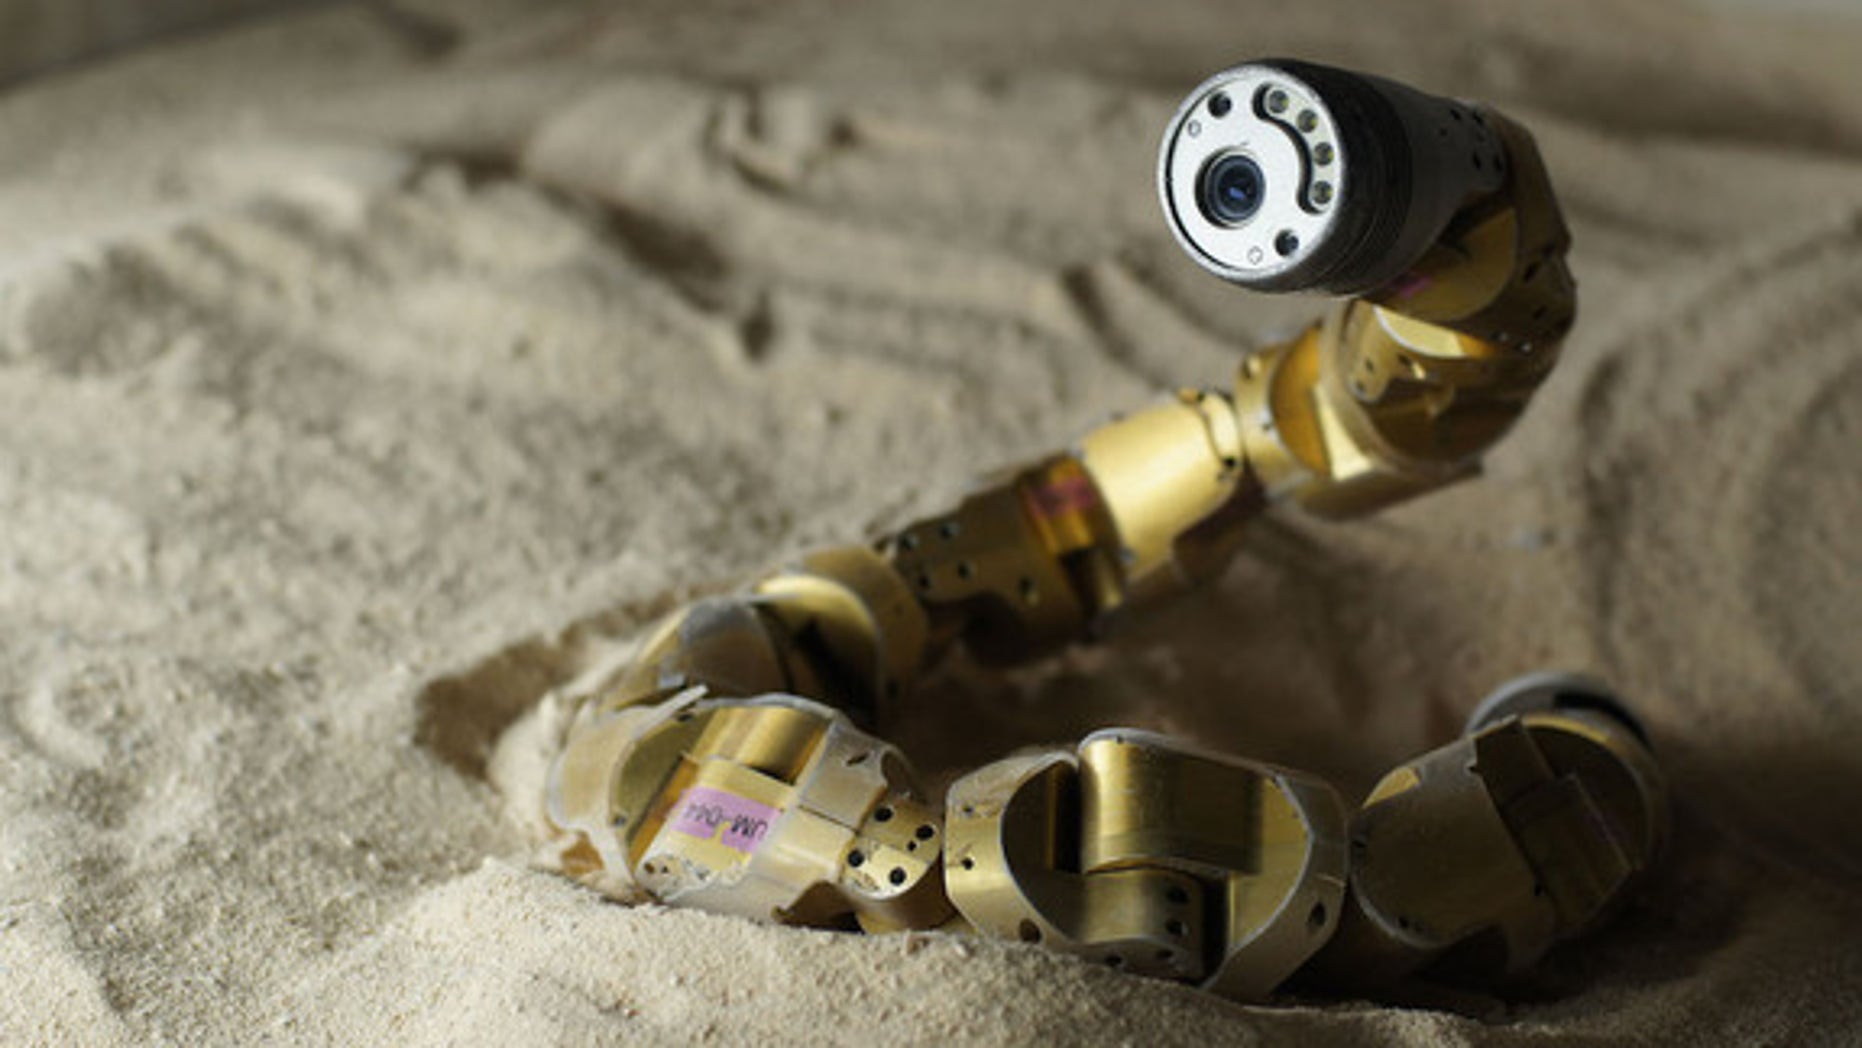 Snake robots! Slithering machines could aid search-and-rescue efforts | Fox News